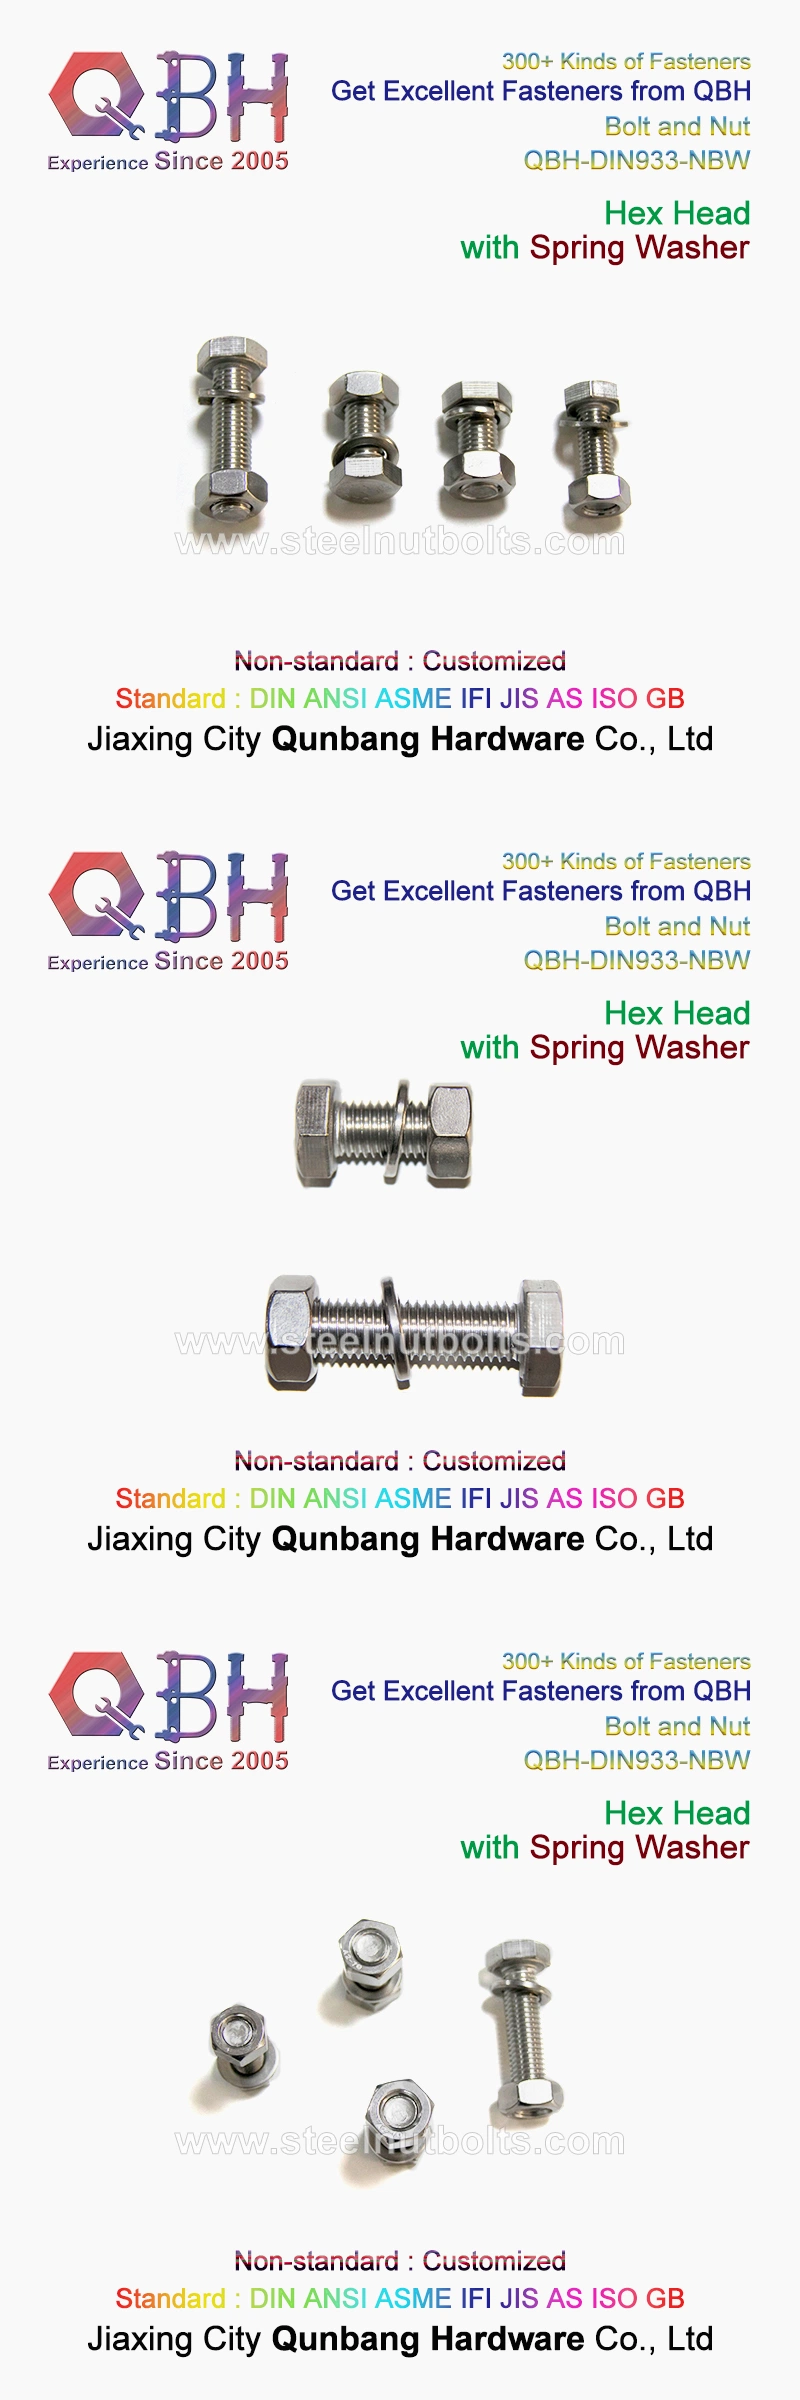 Qbh Steel Structure Construction ASTM A325m 2h Nut F436m Plain Washer Assembly